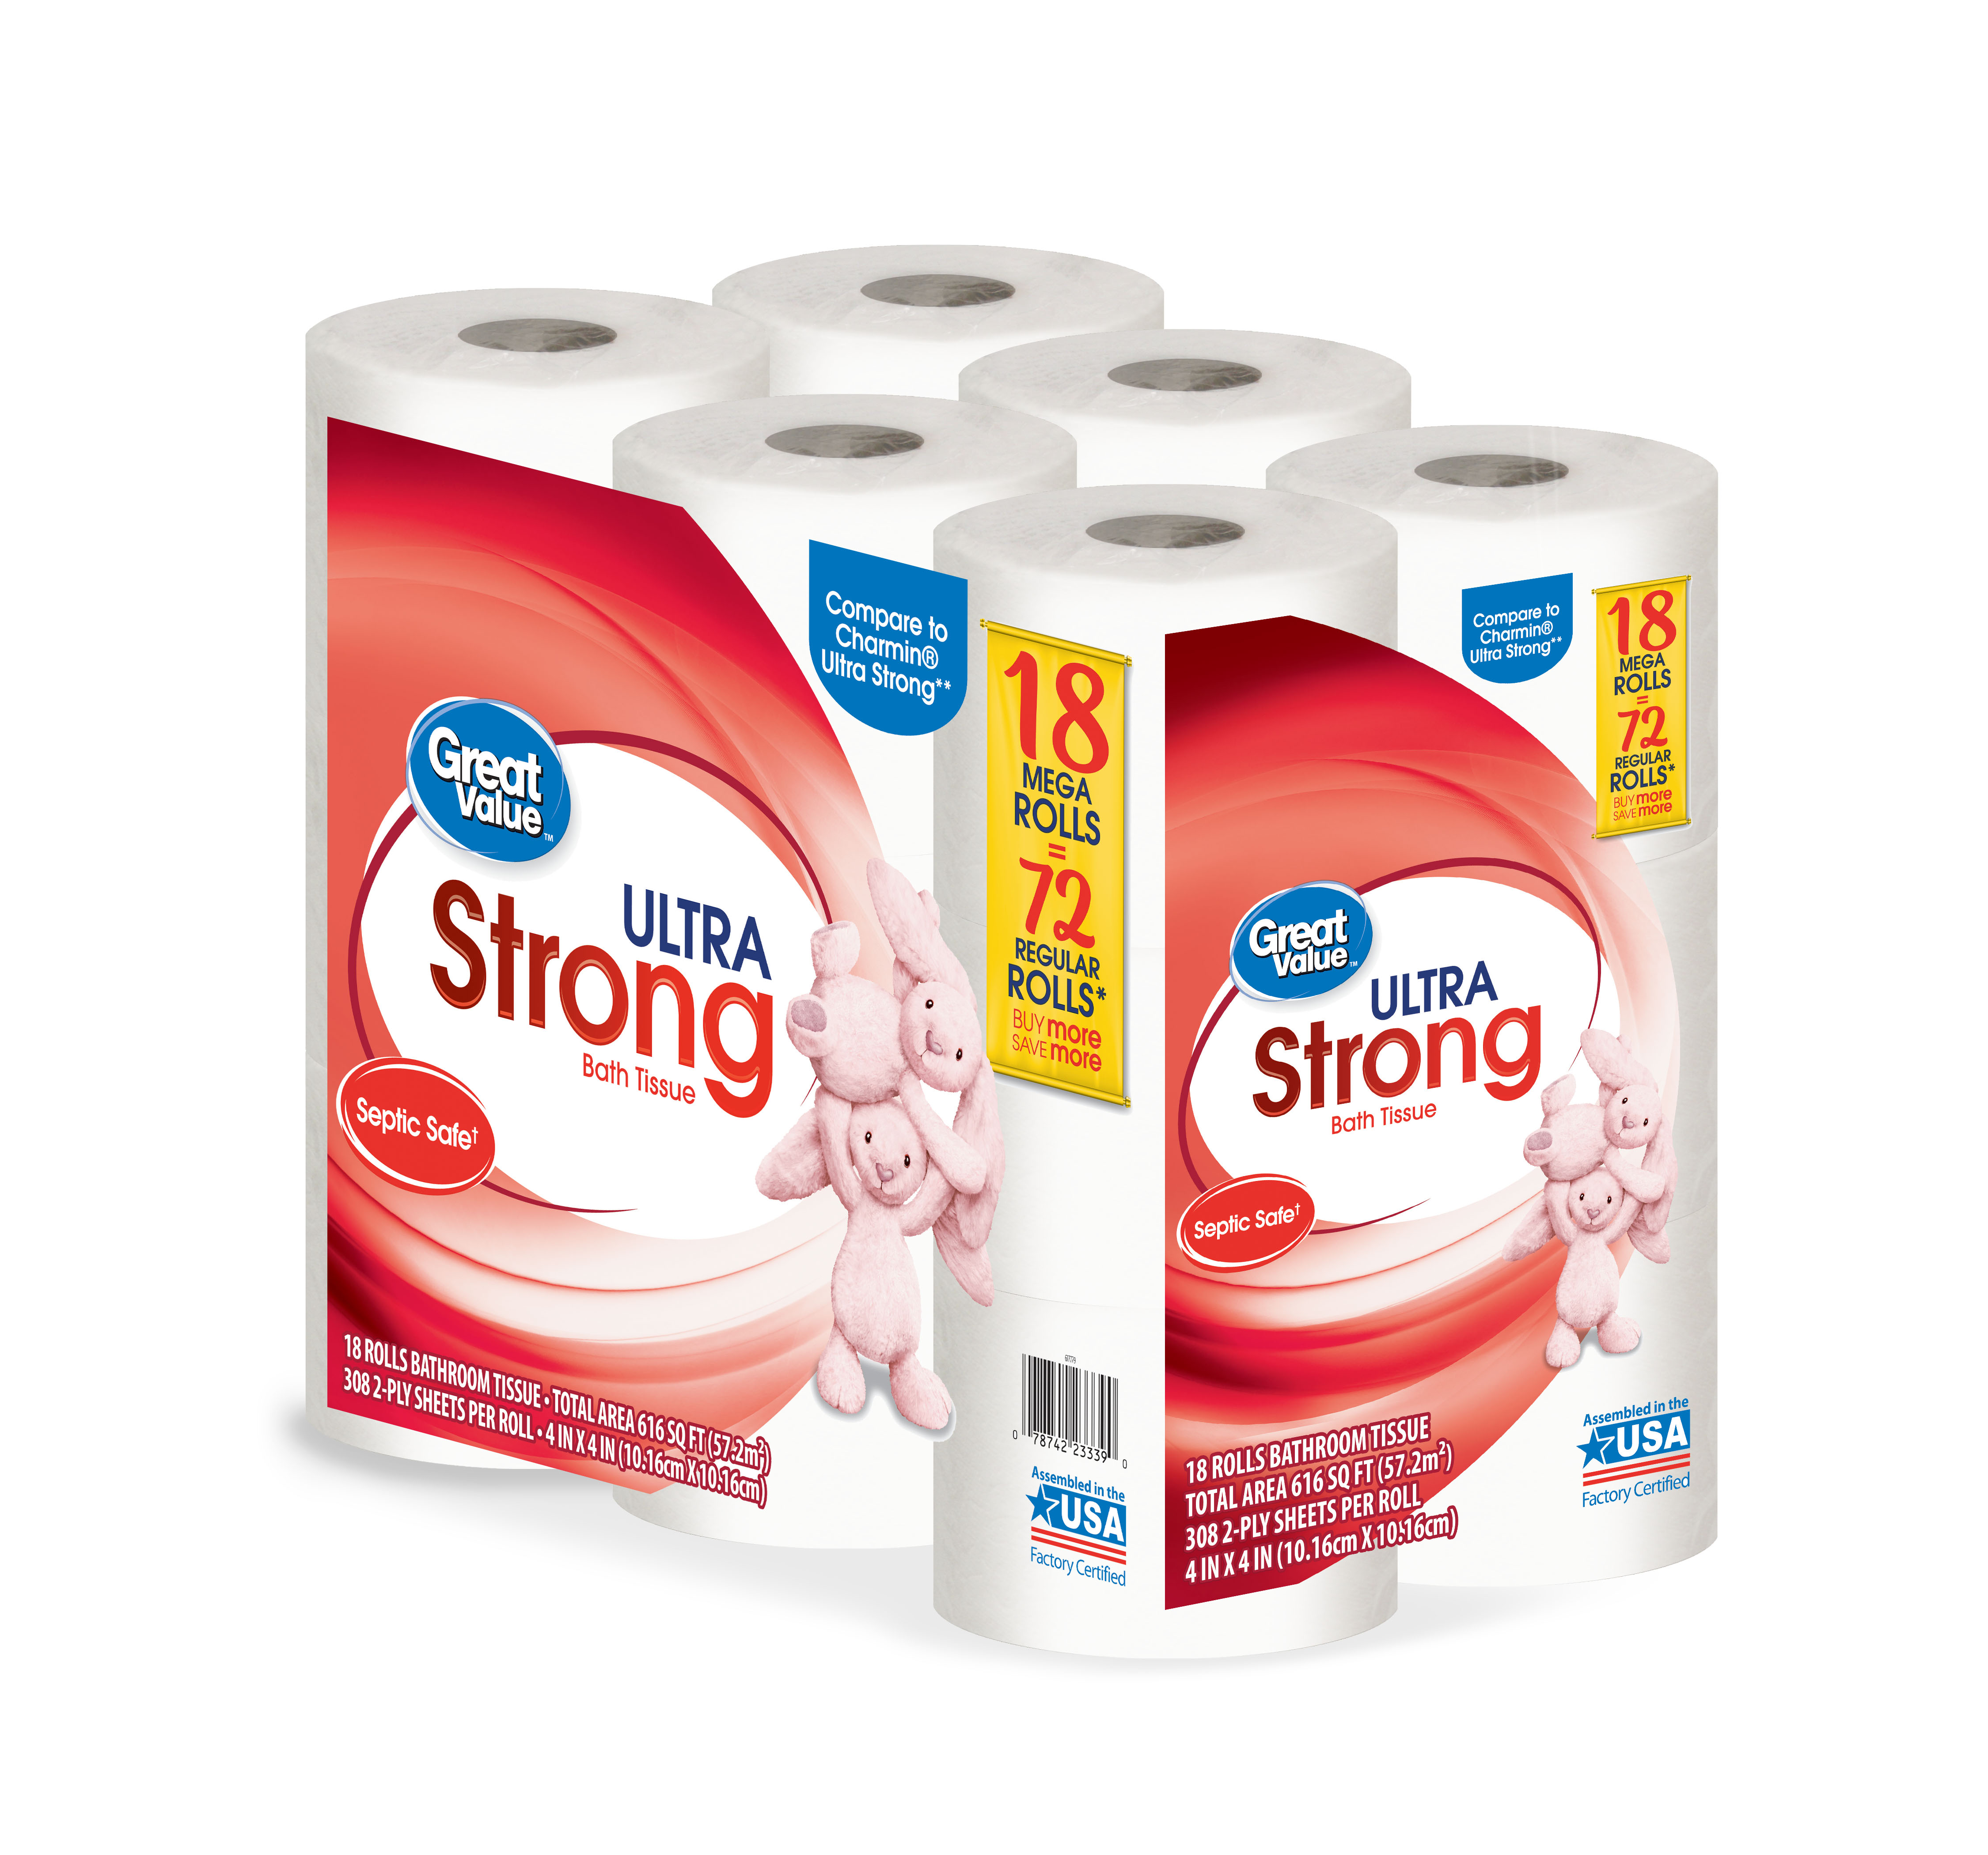 Great Value Ultra Strong Toilet Paper, 18 Mega Rolls - image 2 of 7